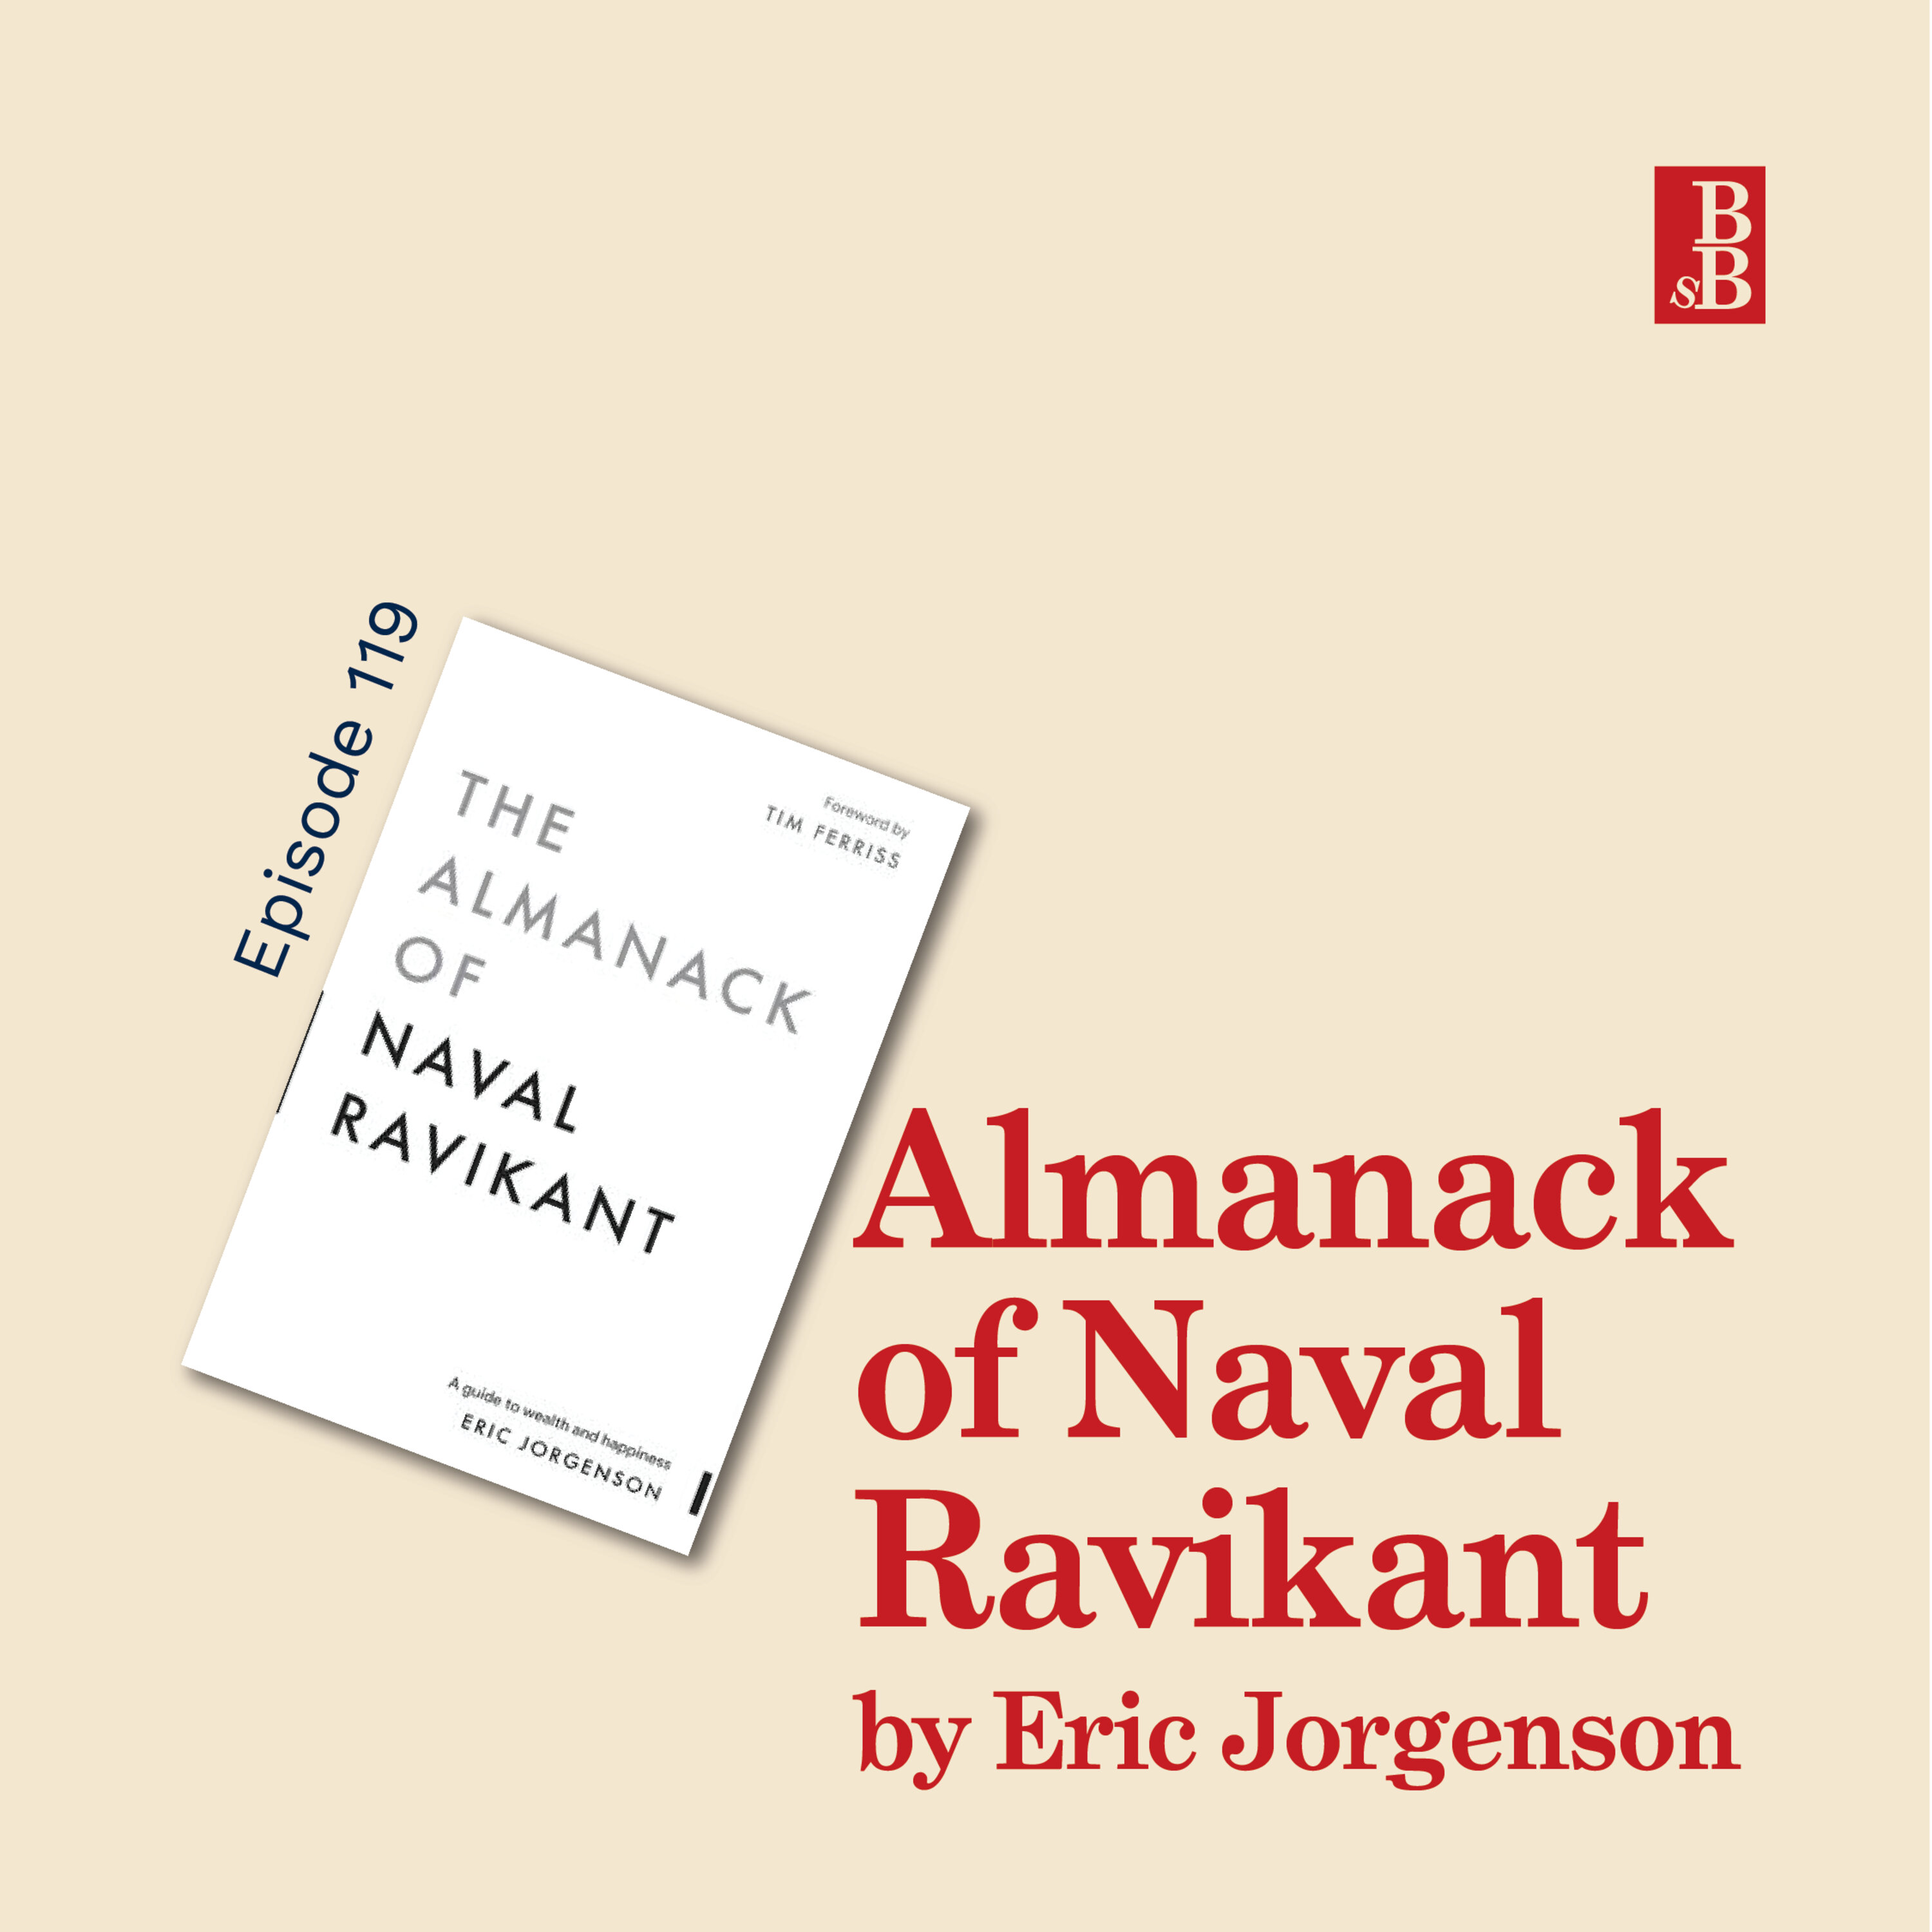 Almanack of Naval Ravikant by Eric Jorgenson: the principles behind wealth and happiness Image